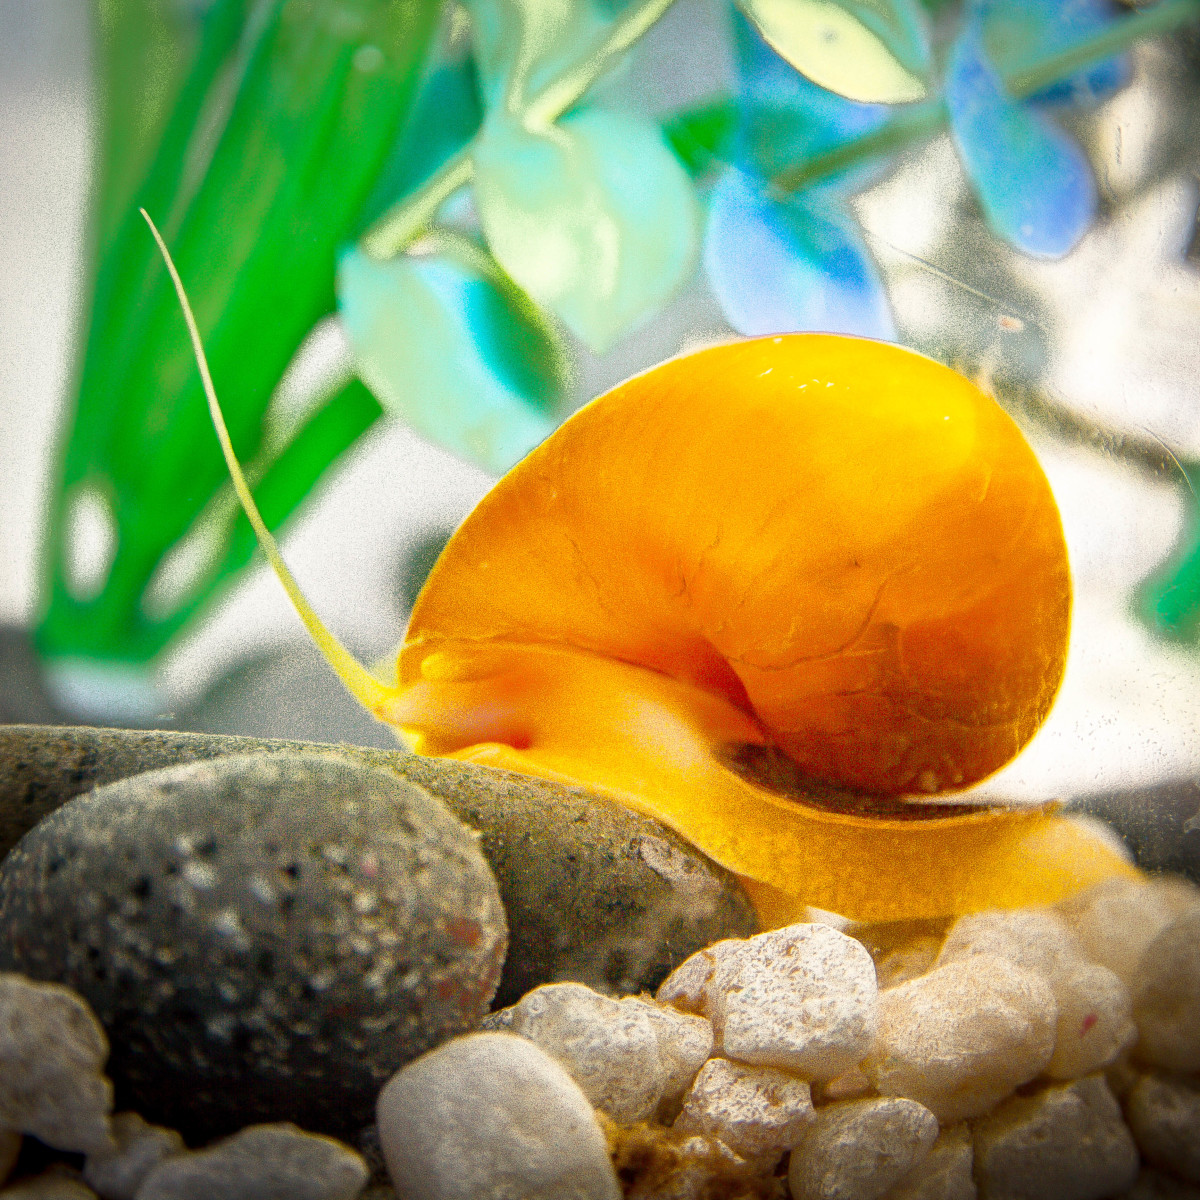 These snails are pretty and can help maintain a clean aquarium.